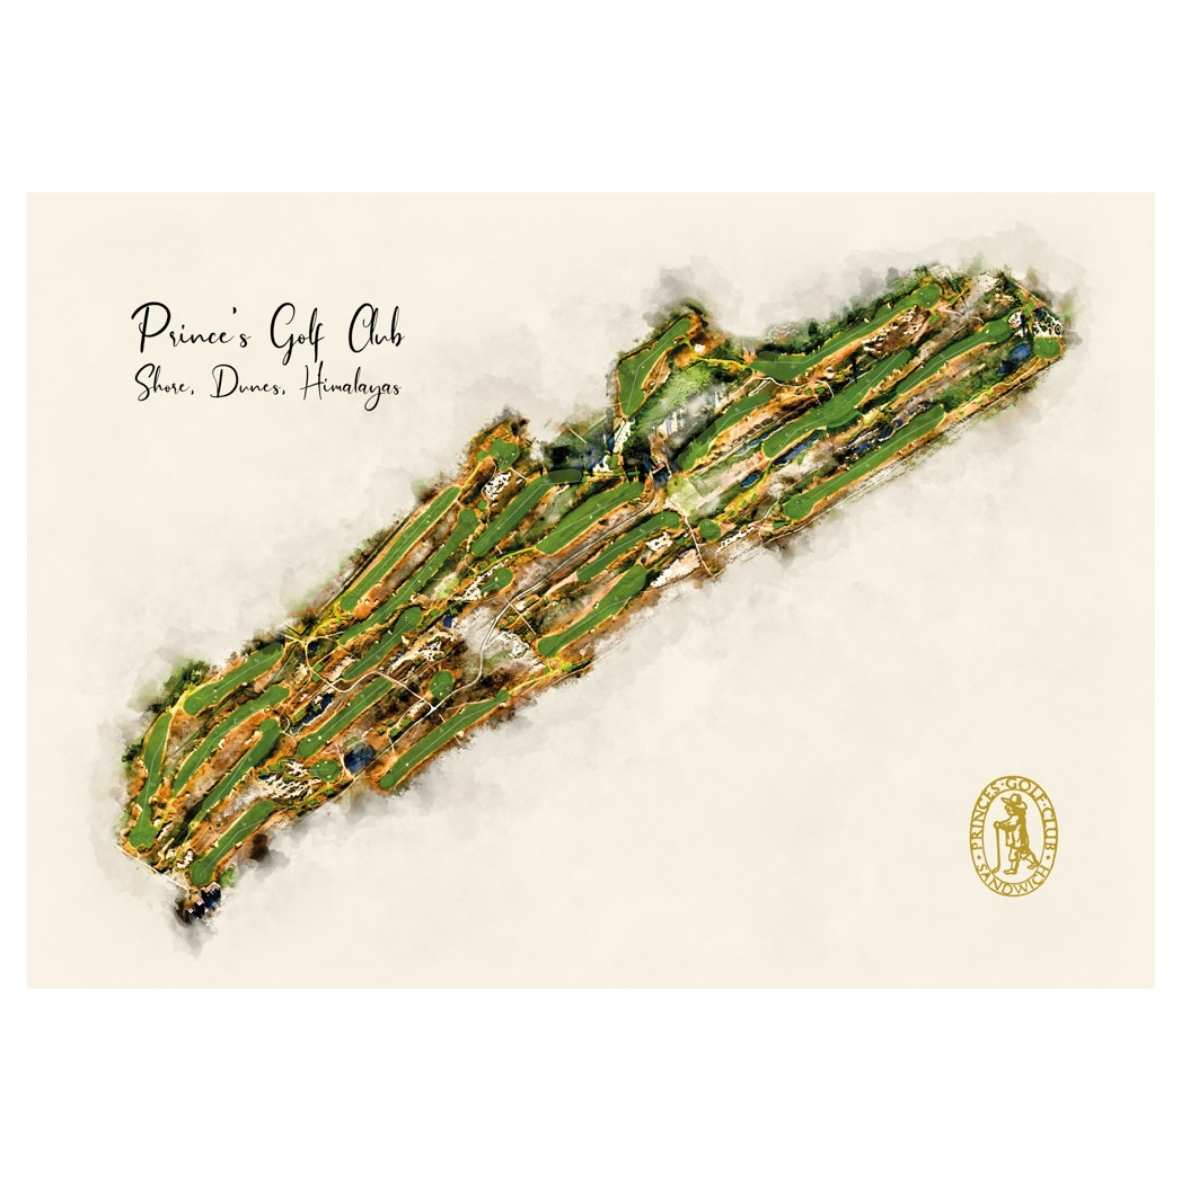 A complete course watermap of princes golf club by Joe McDonnell